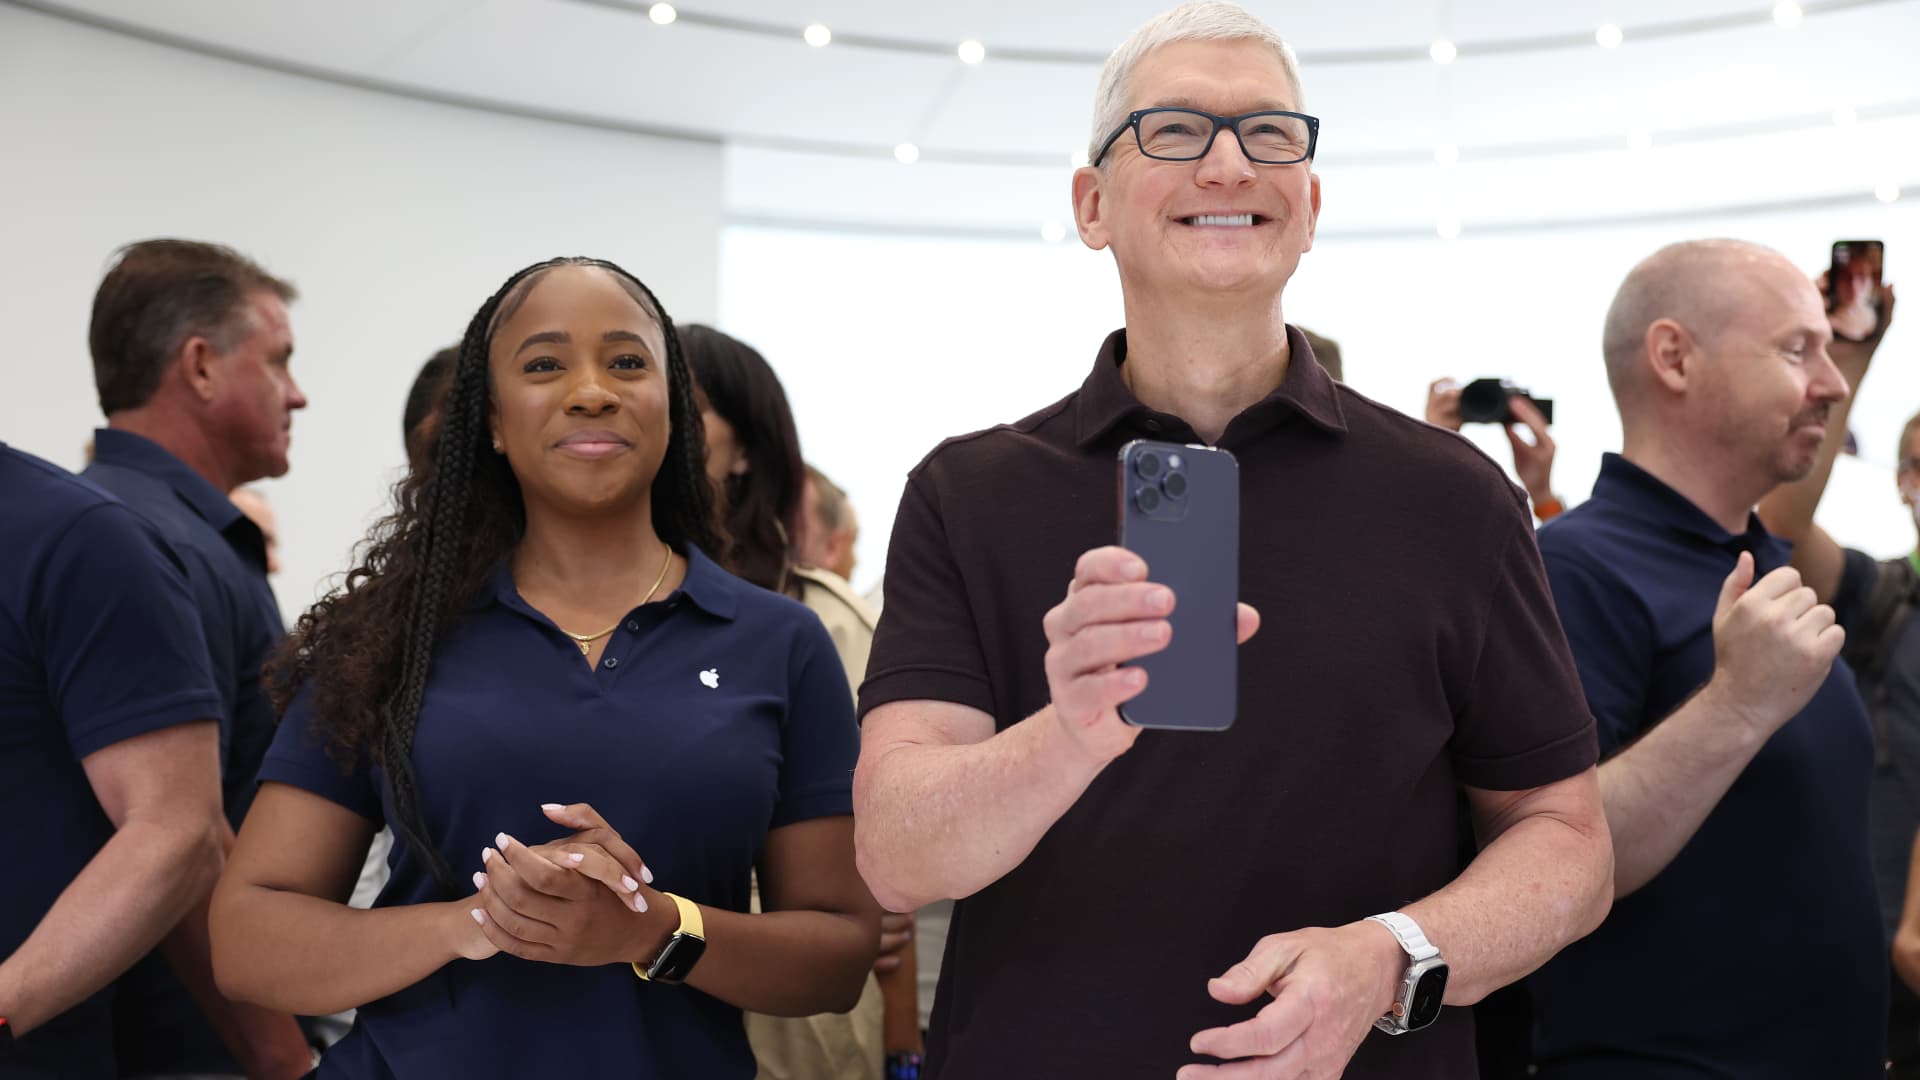 Apple's long-term positives outweigh earnings miss: Morgan Stanley